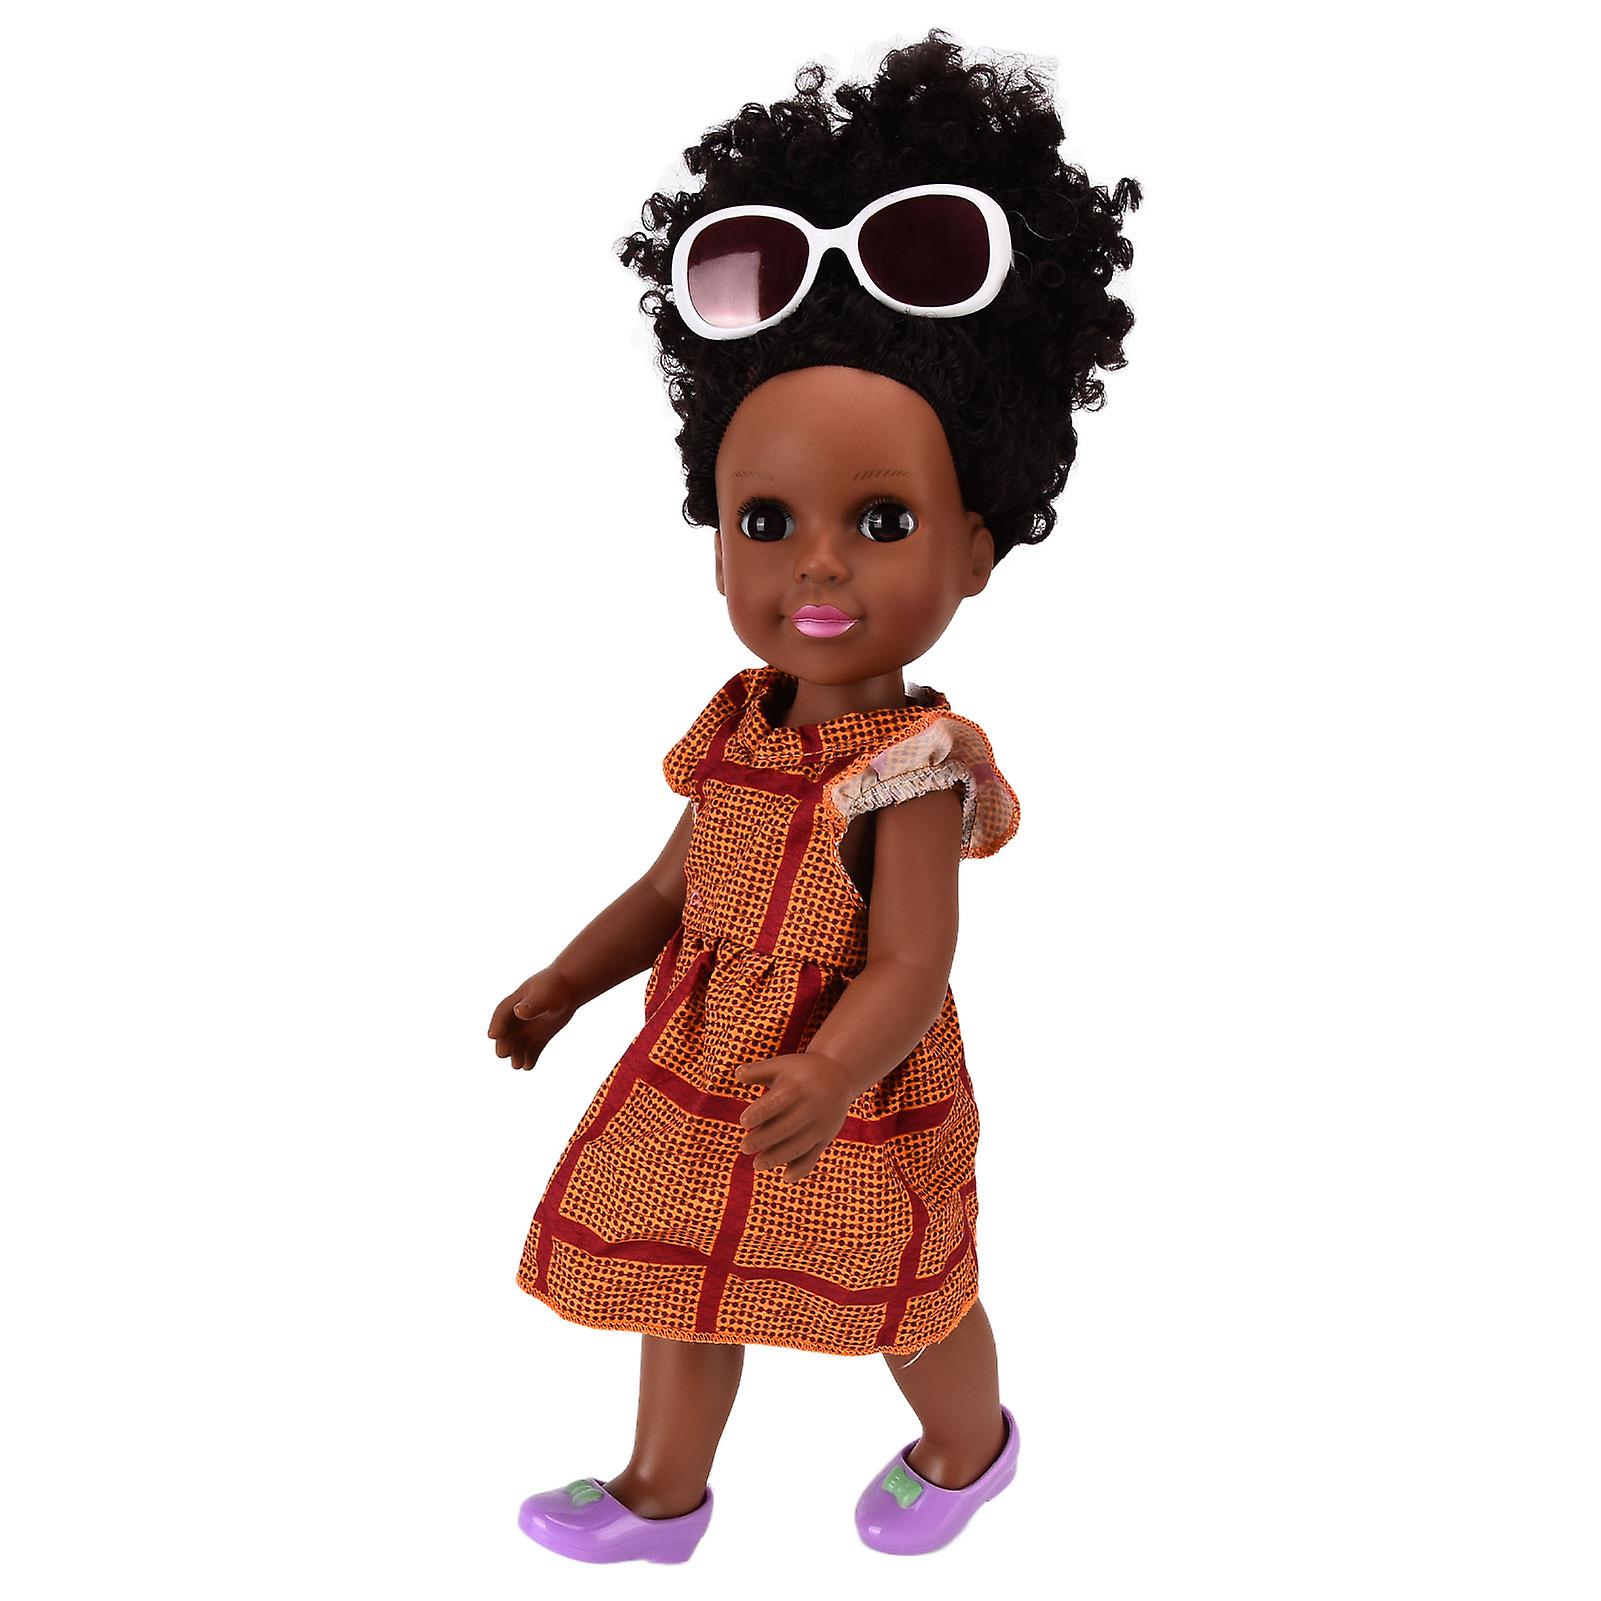 14in Black Baby Doll American African Realistic Vinyl Girl Toy For Children Birthday Gifts